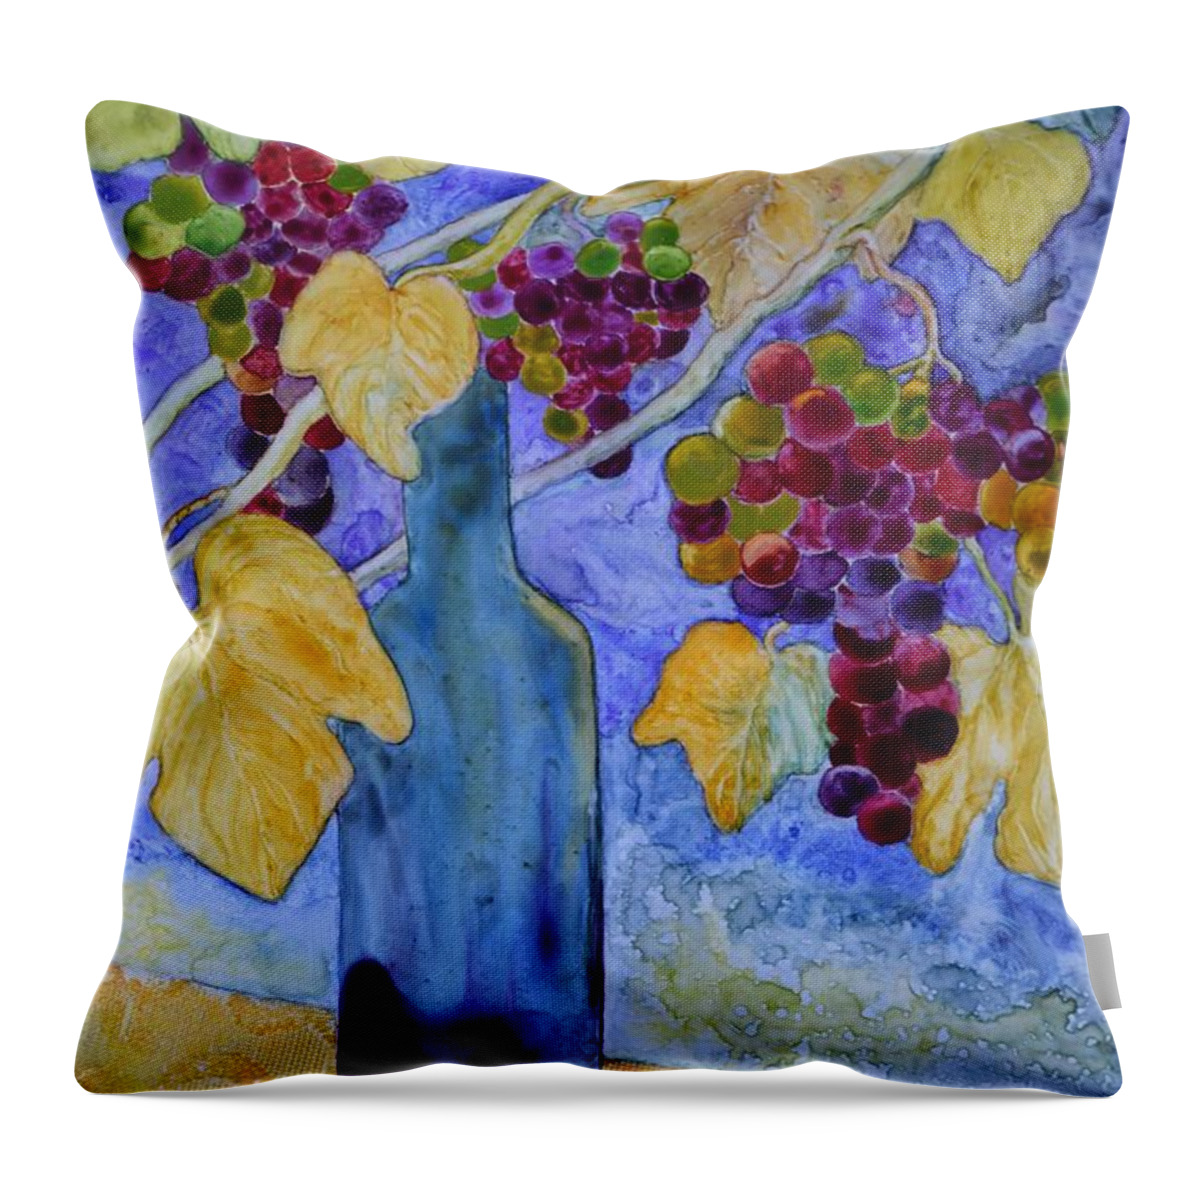 Merlot Throw Pillow featuring the painting Merlot by Nancy Jolley